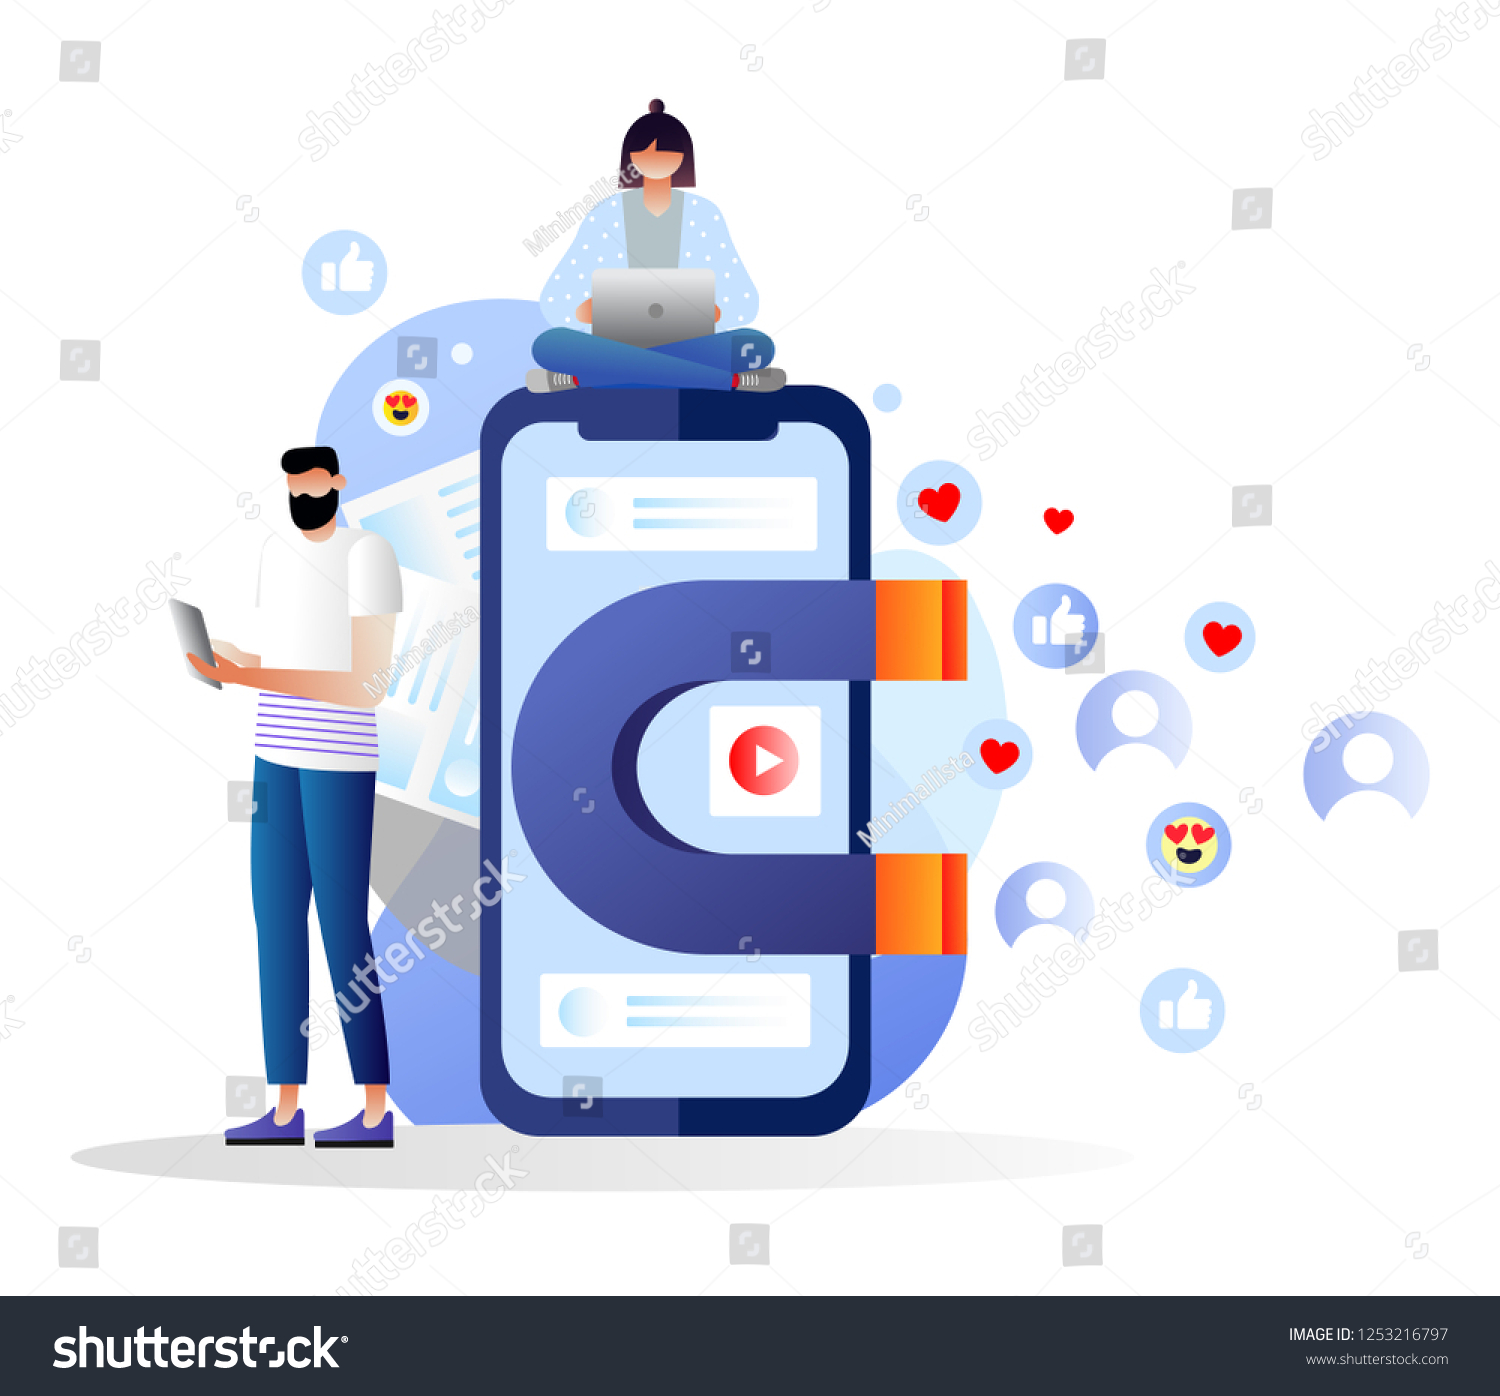 SVG of attracting online customers vector illustration.Big magnet and people with laptop around. Customer retention strategy, digital inbound marketing, customer attraction gradient banner. Characters. svg